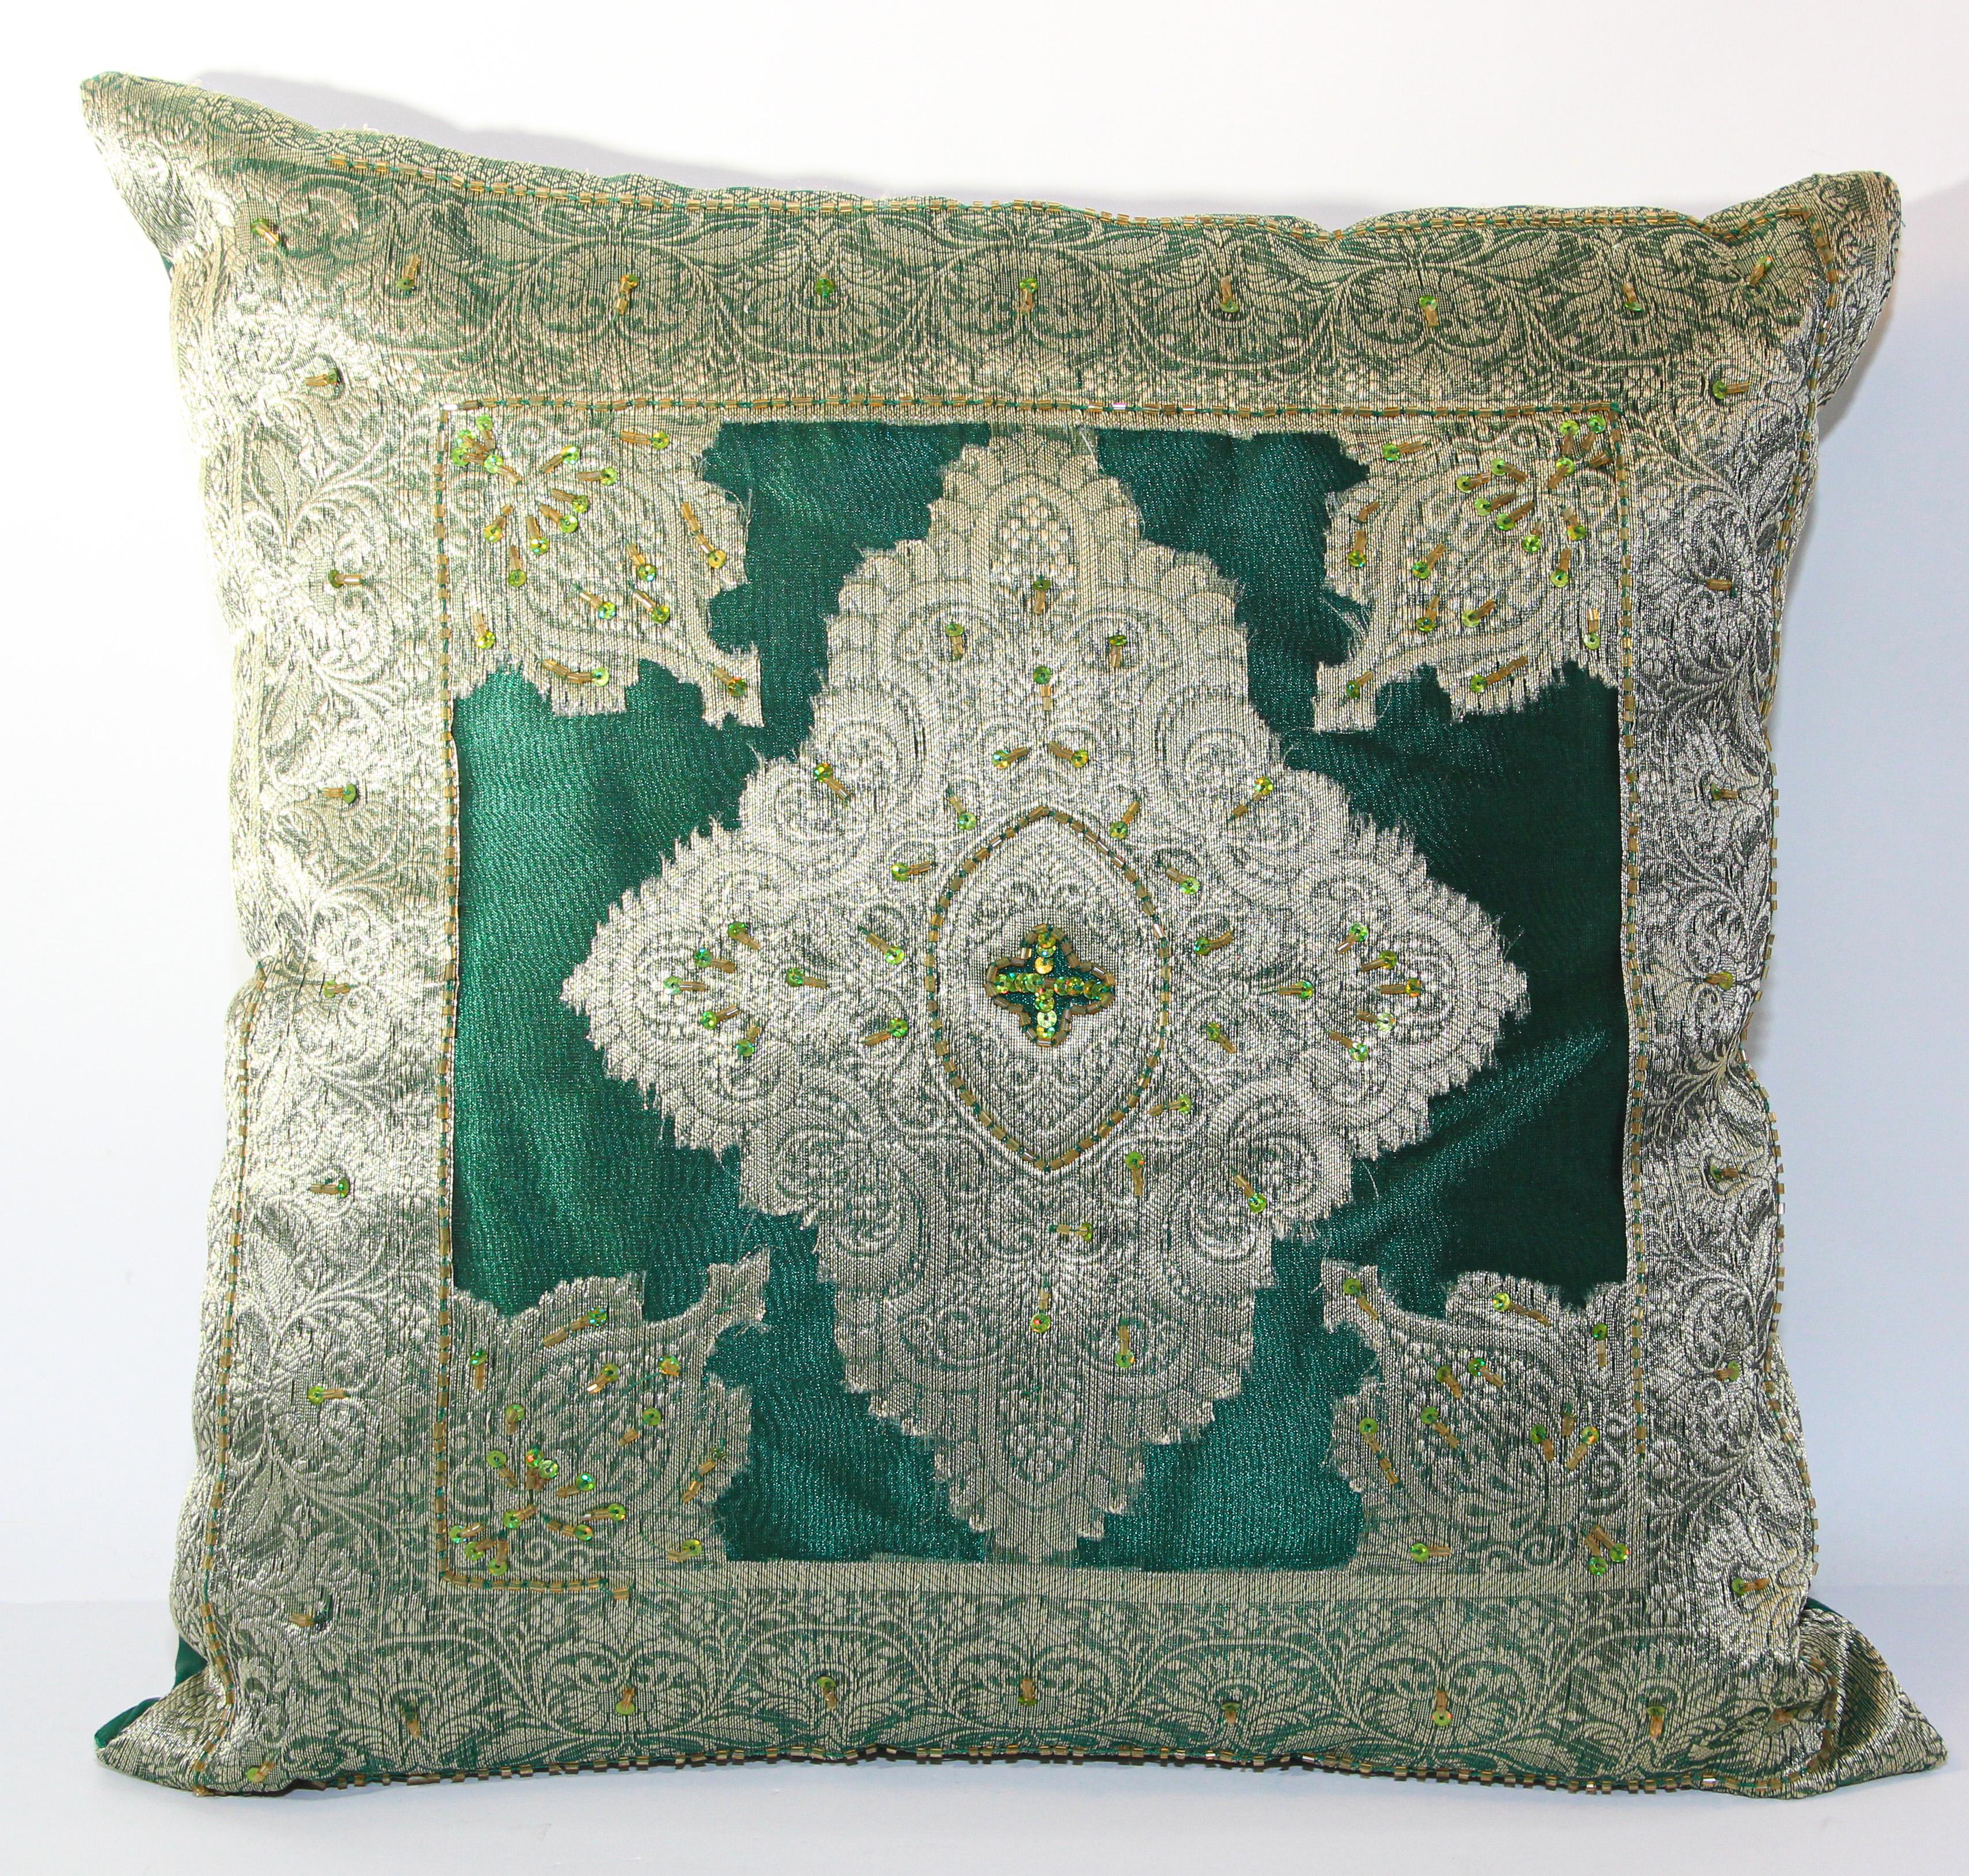 Moorish Throw decorative accent green pillow embroidered and embellished with sequins with metallic threads, gold beads embroidery on emerald green silk damask.
Handcrafted in India.
Great to use as accent throw pillows in you Moorish Middle